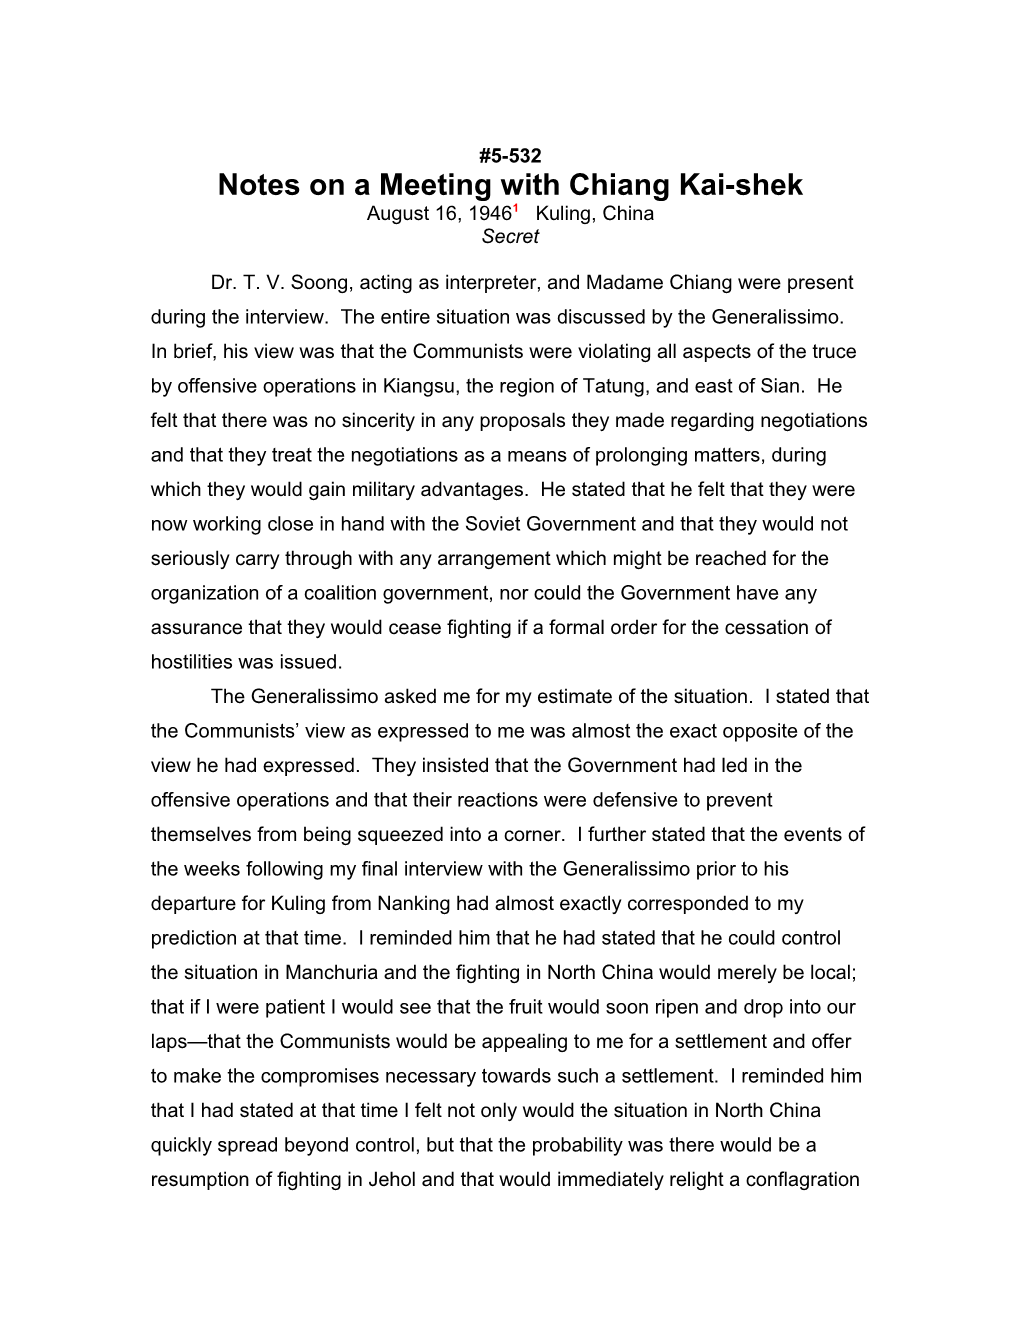 Notes on a Meeting with Chiang Kai-Shek